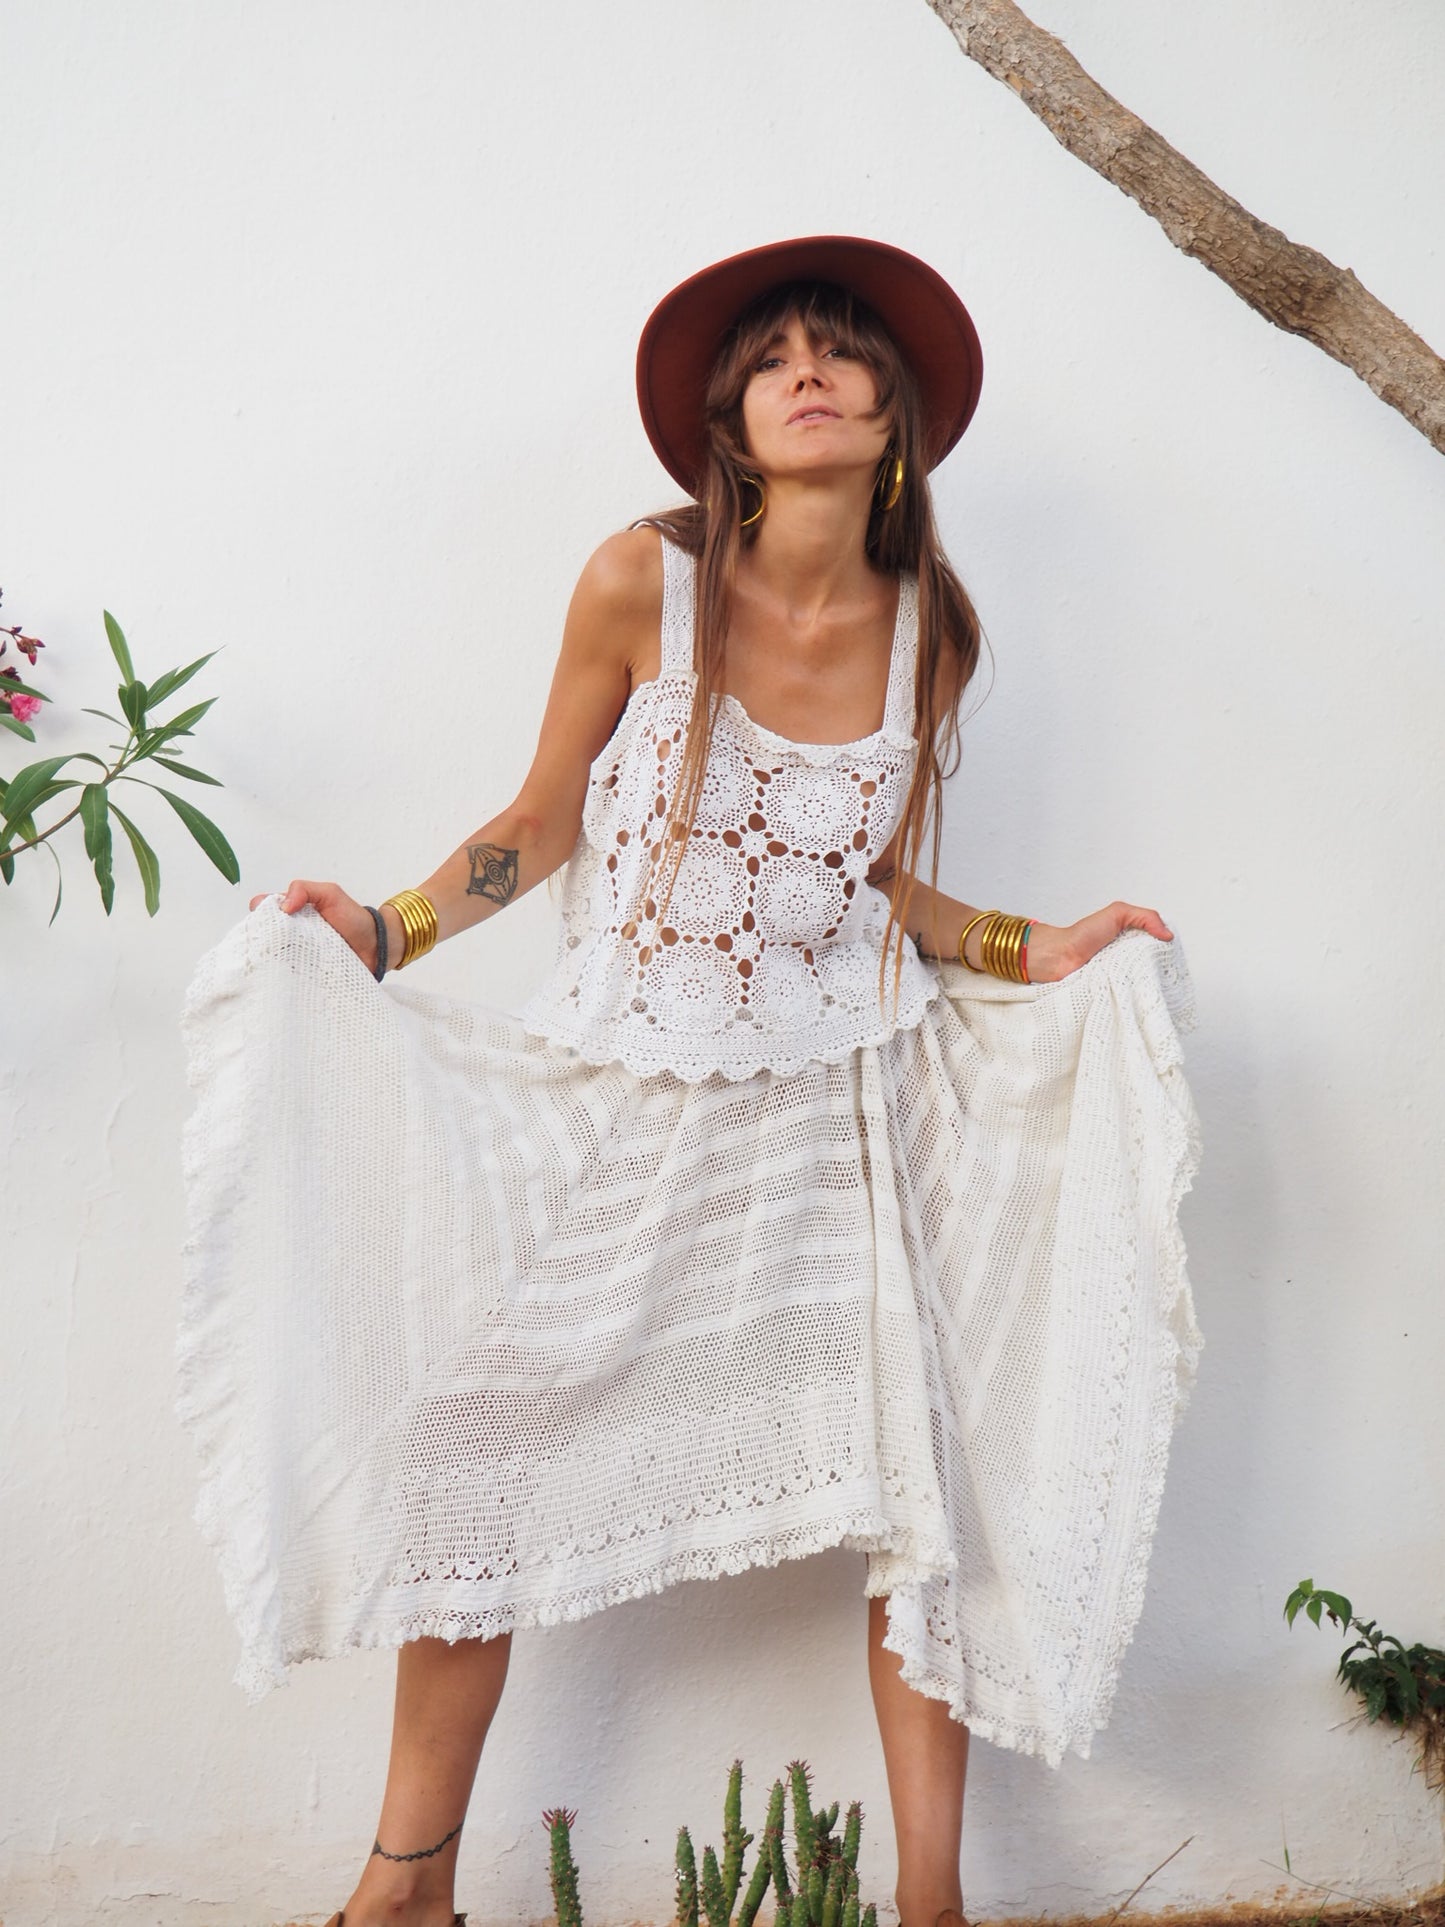 Vintage white lace crochet skirt up-cycled by Vagabond Ibiza